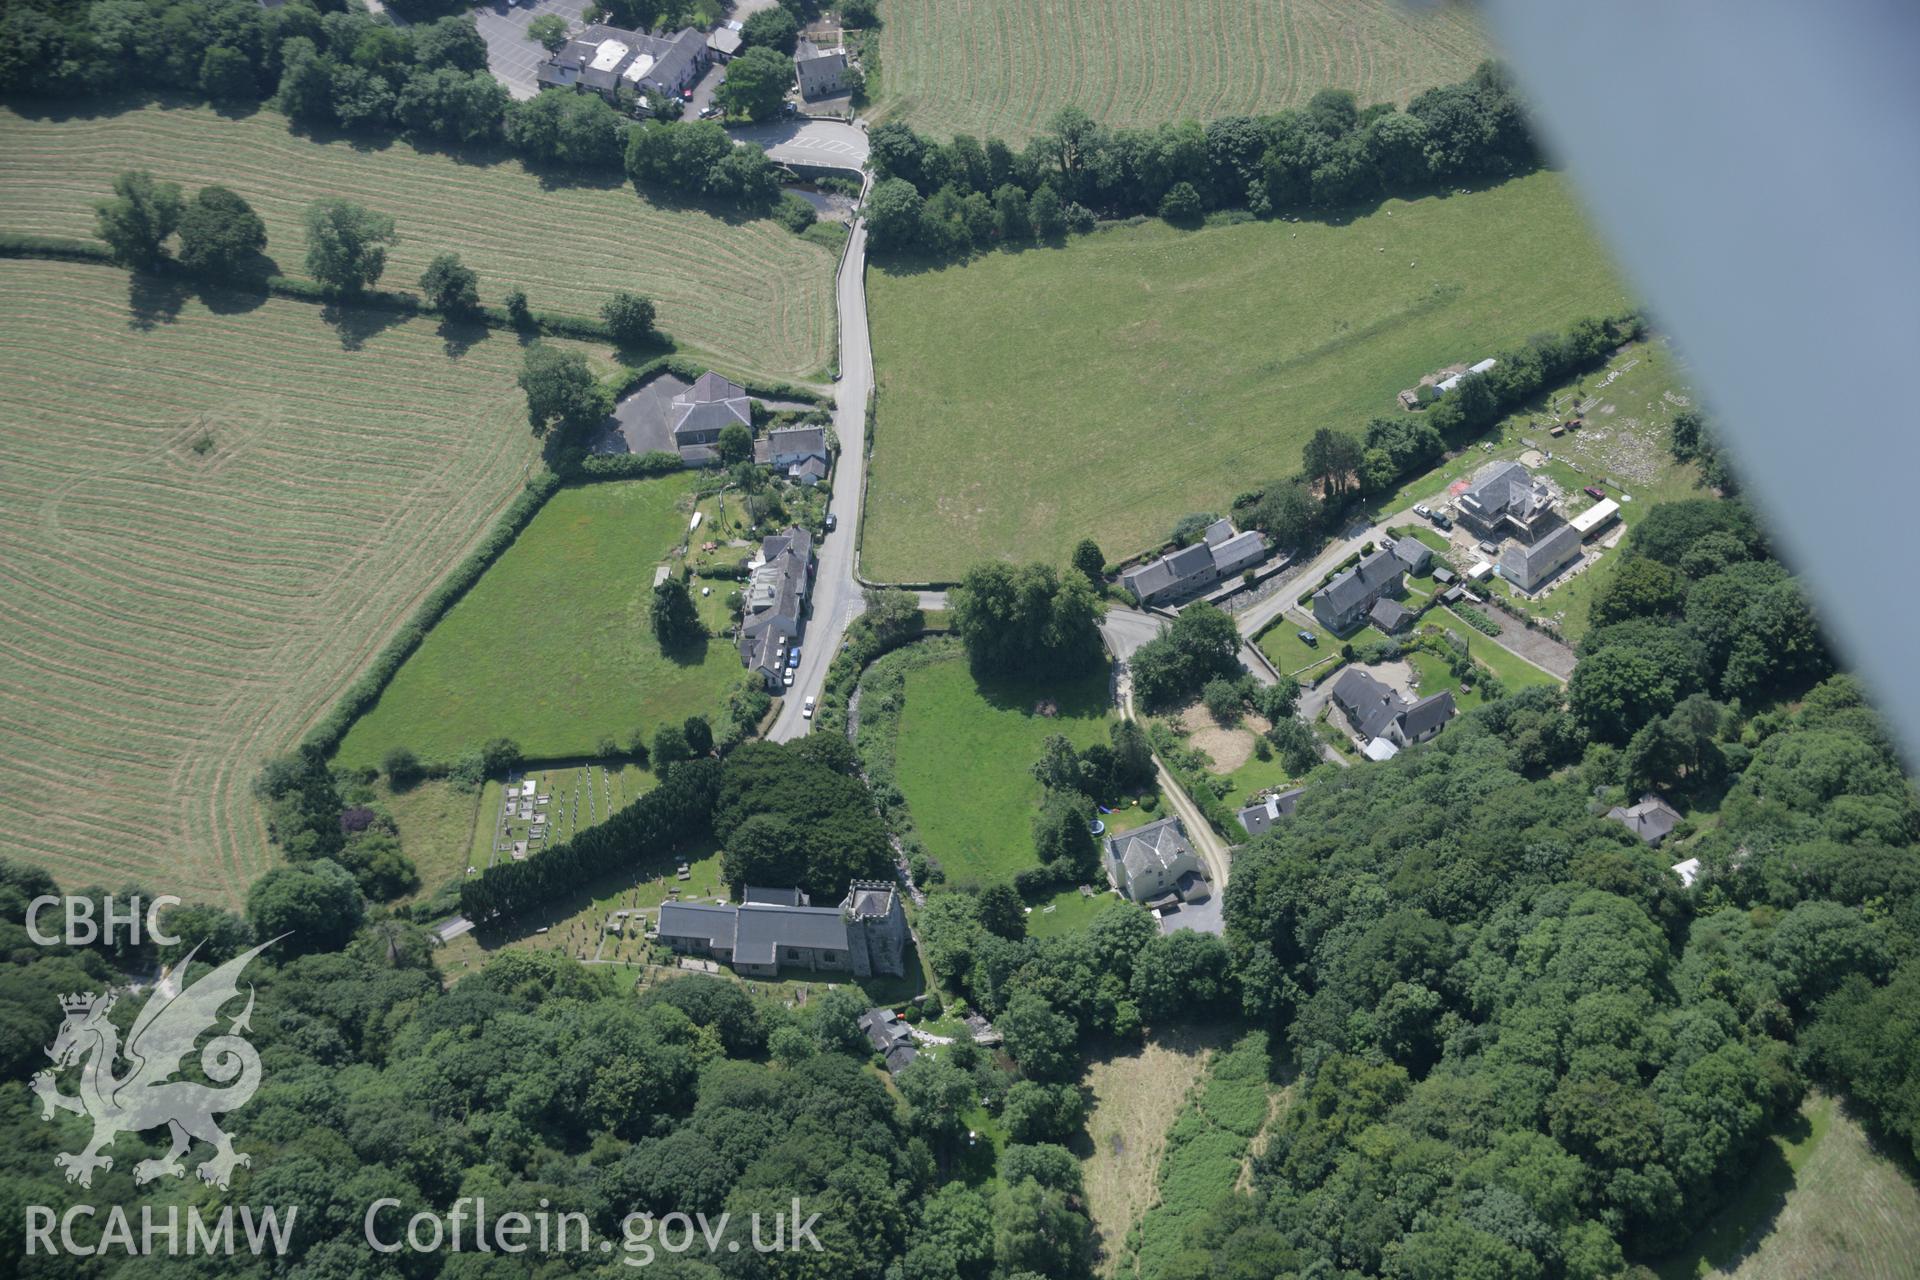 RCAHMW colour oblique aerial photograph of St Brynach's Church, Nevern, from the north-east. Taken on 11 July 2005 by Toby Driver